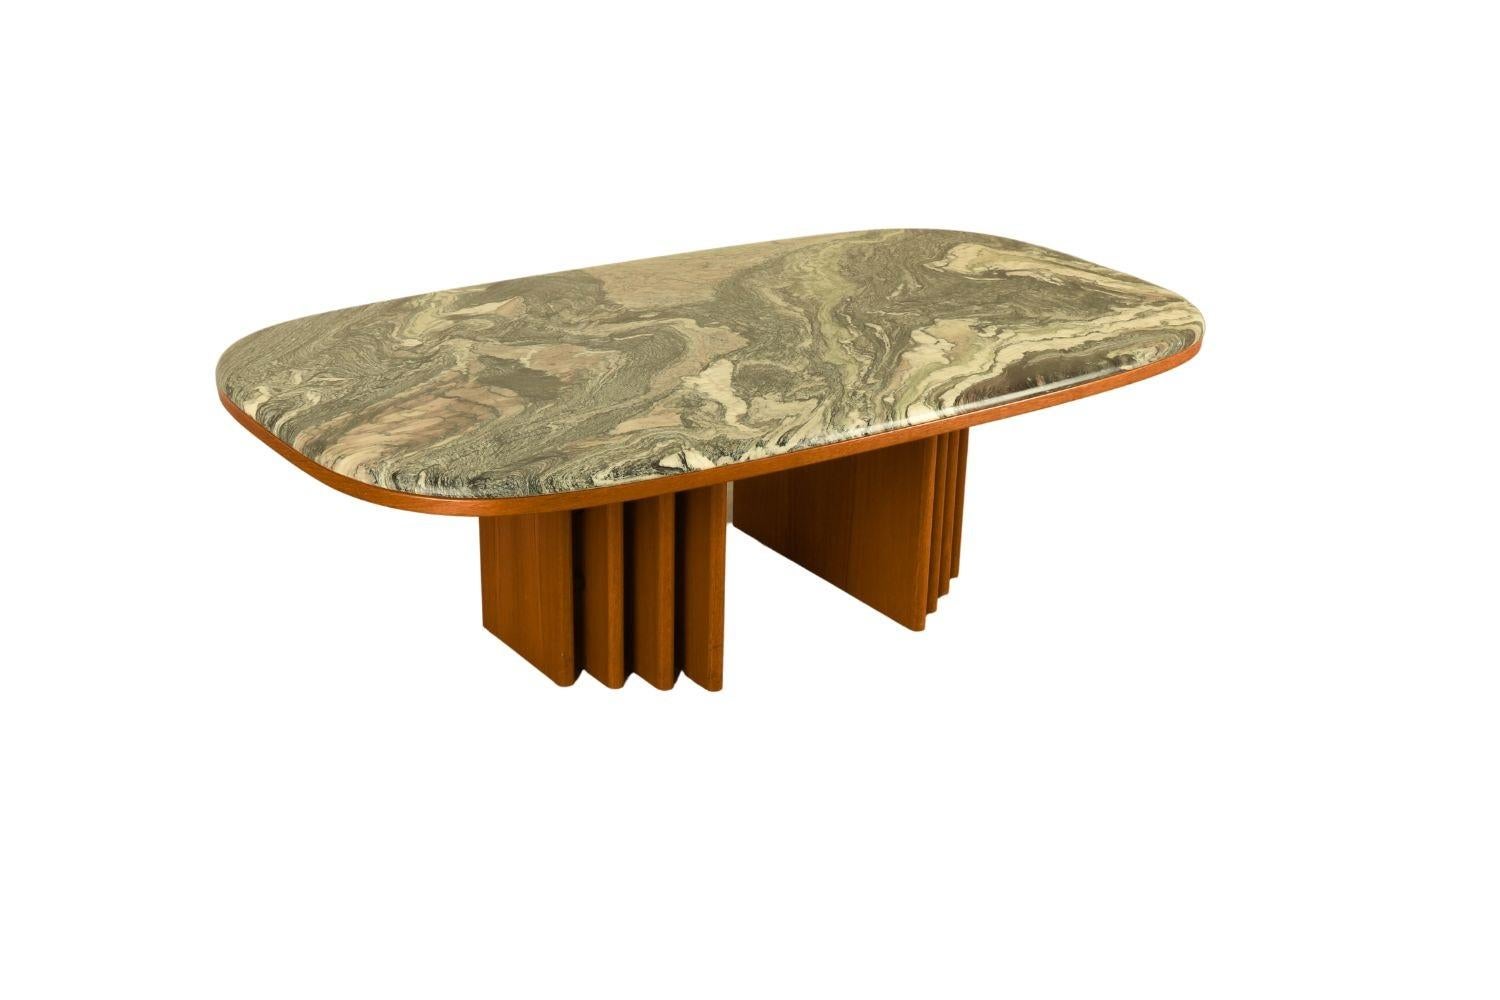 Stunning swirl marble top coffee Table, by Bendixen made in Sweden. The top slab has rounded edges, is heavy and thick. Imported and extracted from Italy quarries. Incredible swirl grain on the marble. The veins and markings in the multi-colored